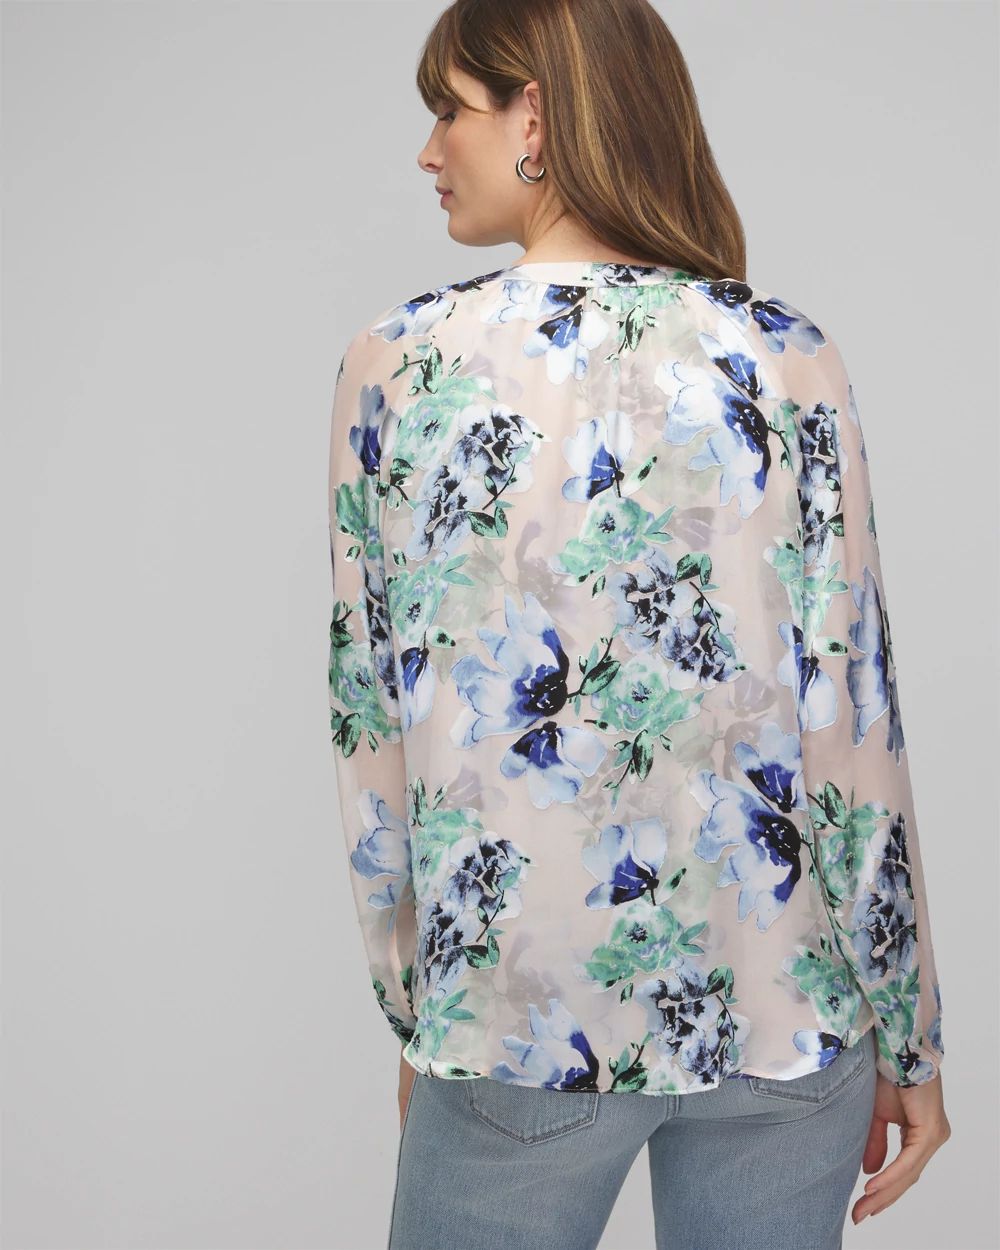 Long Sleeve Floral Silk Burnout Blouse click to view larger image.